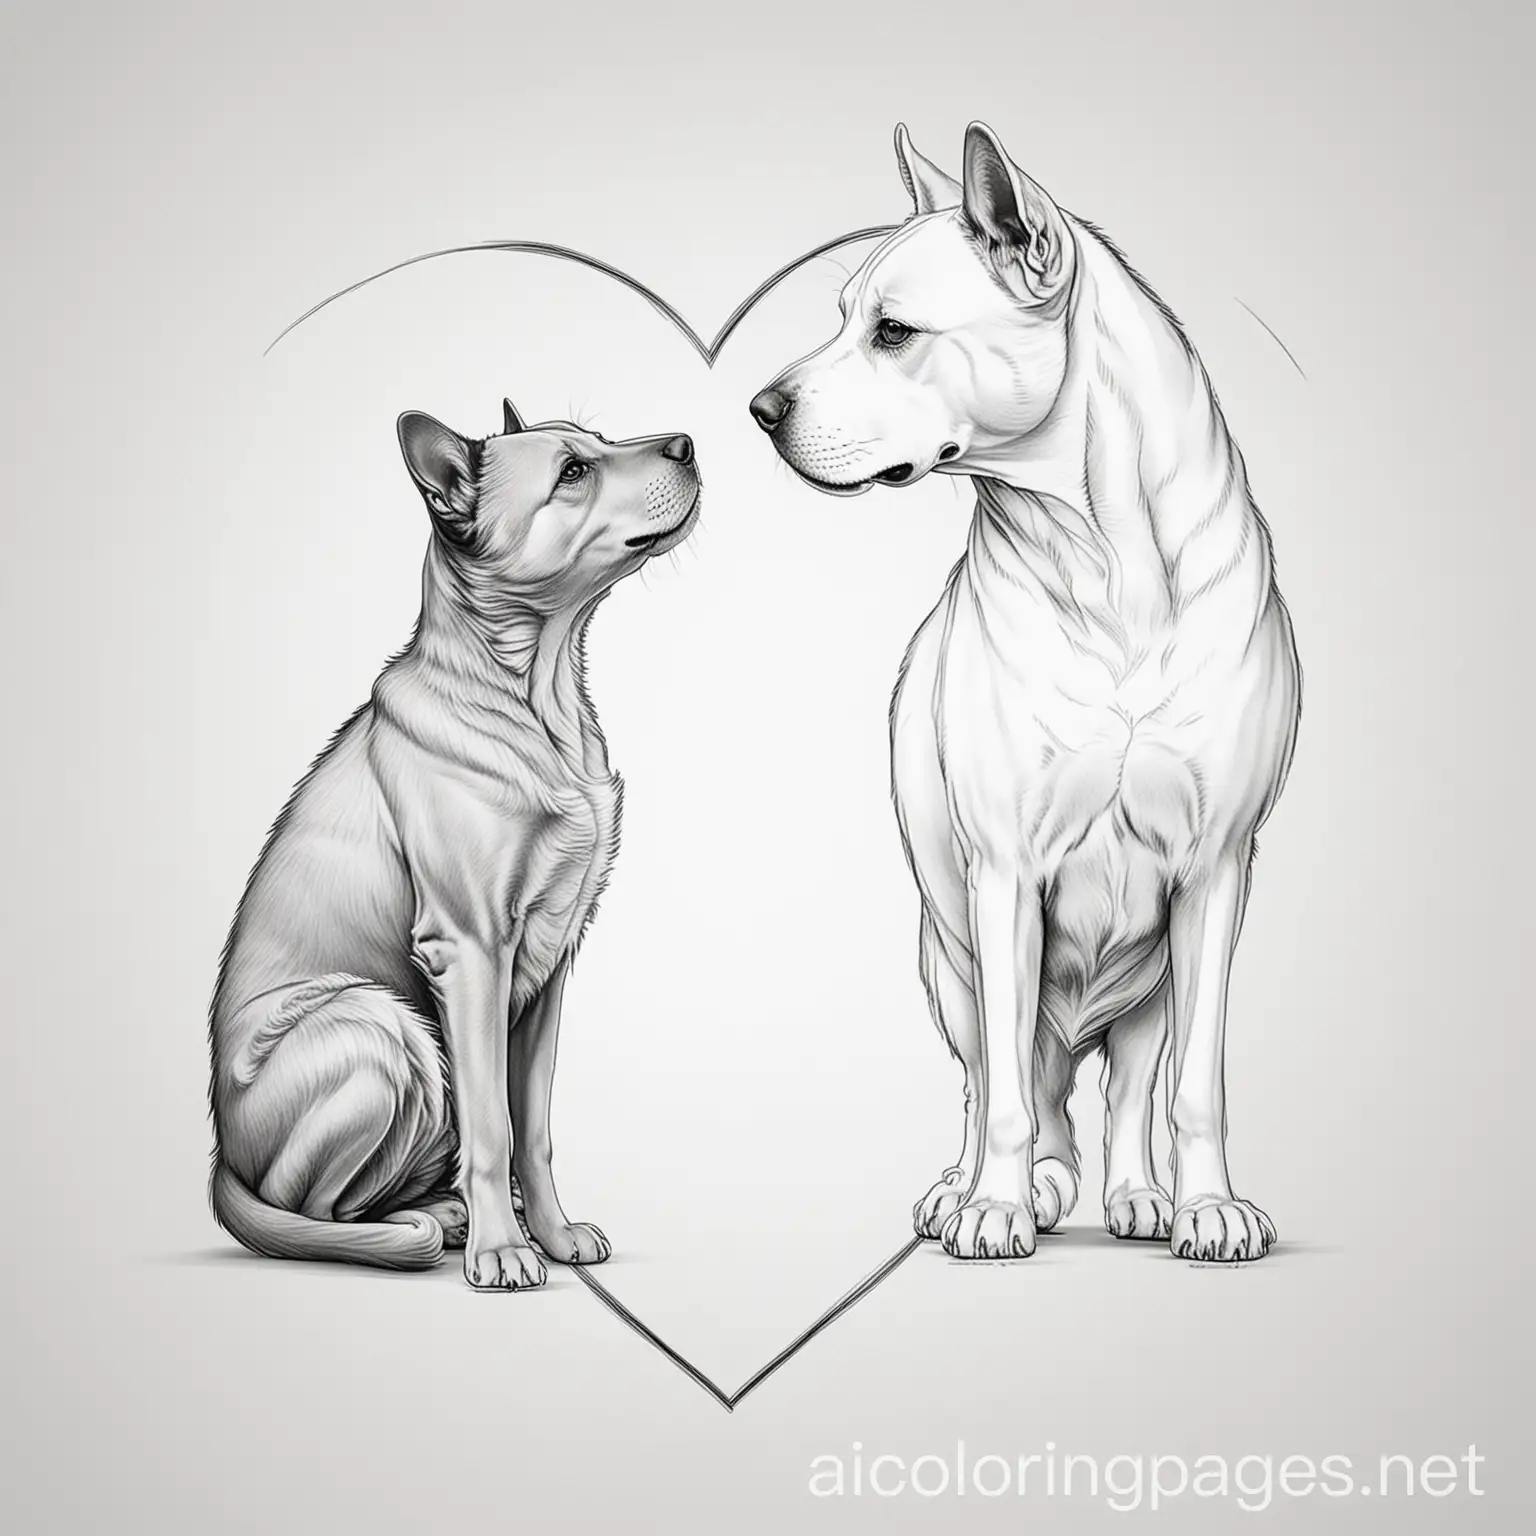 dog and cat where the dogs body and the cats body each form half the shape of a heart, Coloring Page, black and white, line art, white background, Simplicity, Ample White Space. The background of the coloring page is plain white to make it easy for young children to color within the lines. The outlines of all the subjects are easy to distinguish, making it simple for kids to color without too much difficulty